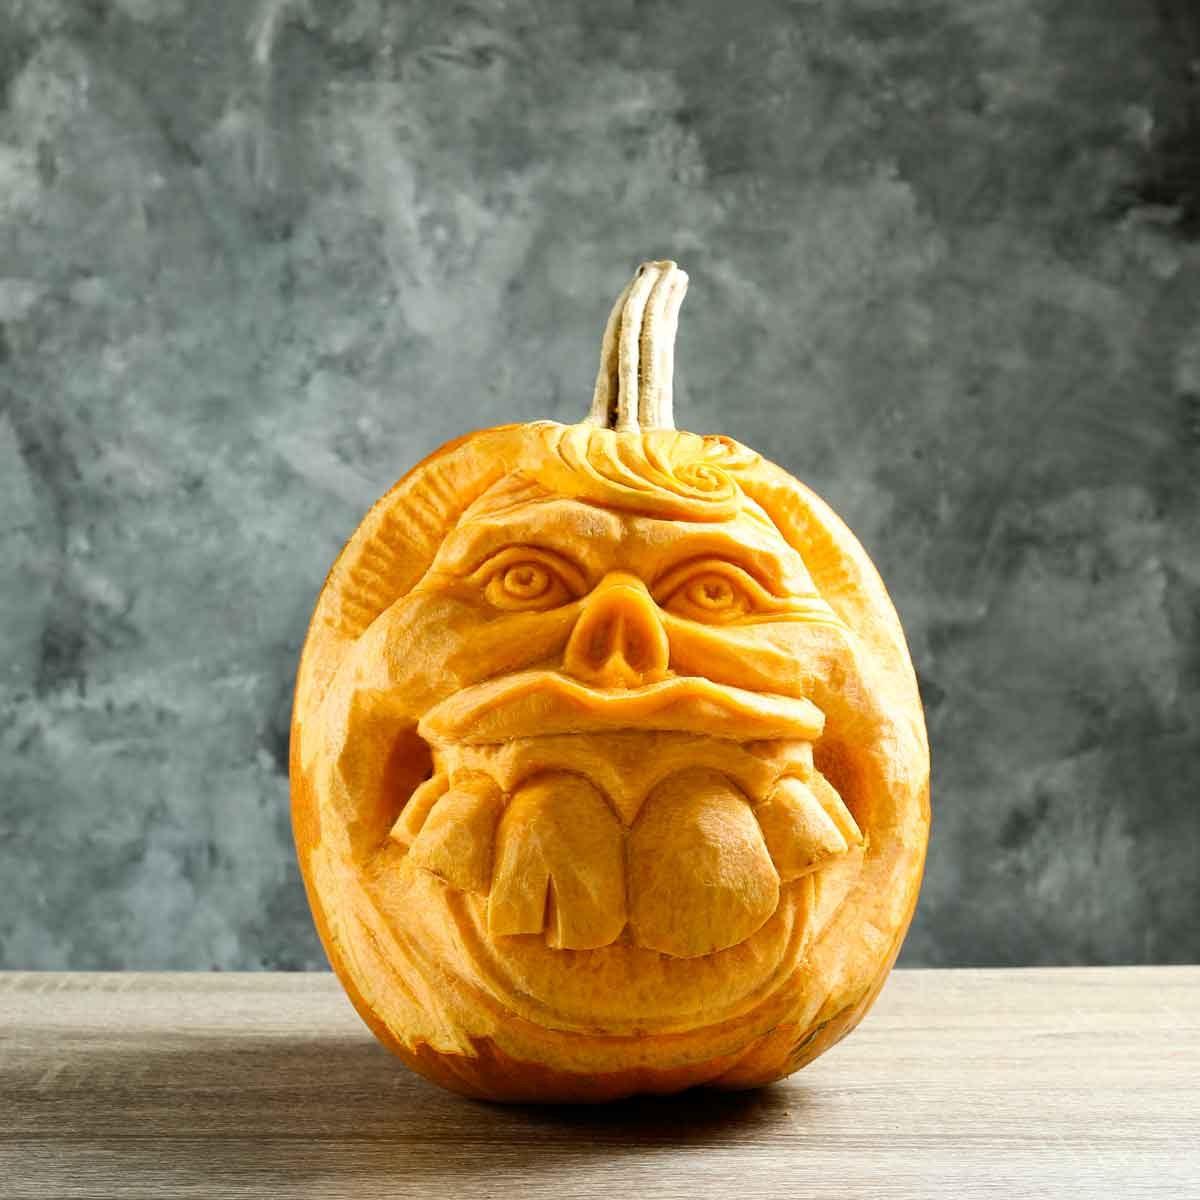 20 Pumpkin Carving Ideas to Inspire You for Halloween 2022